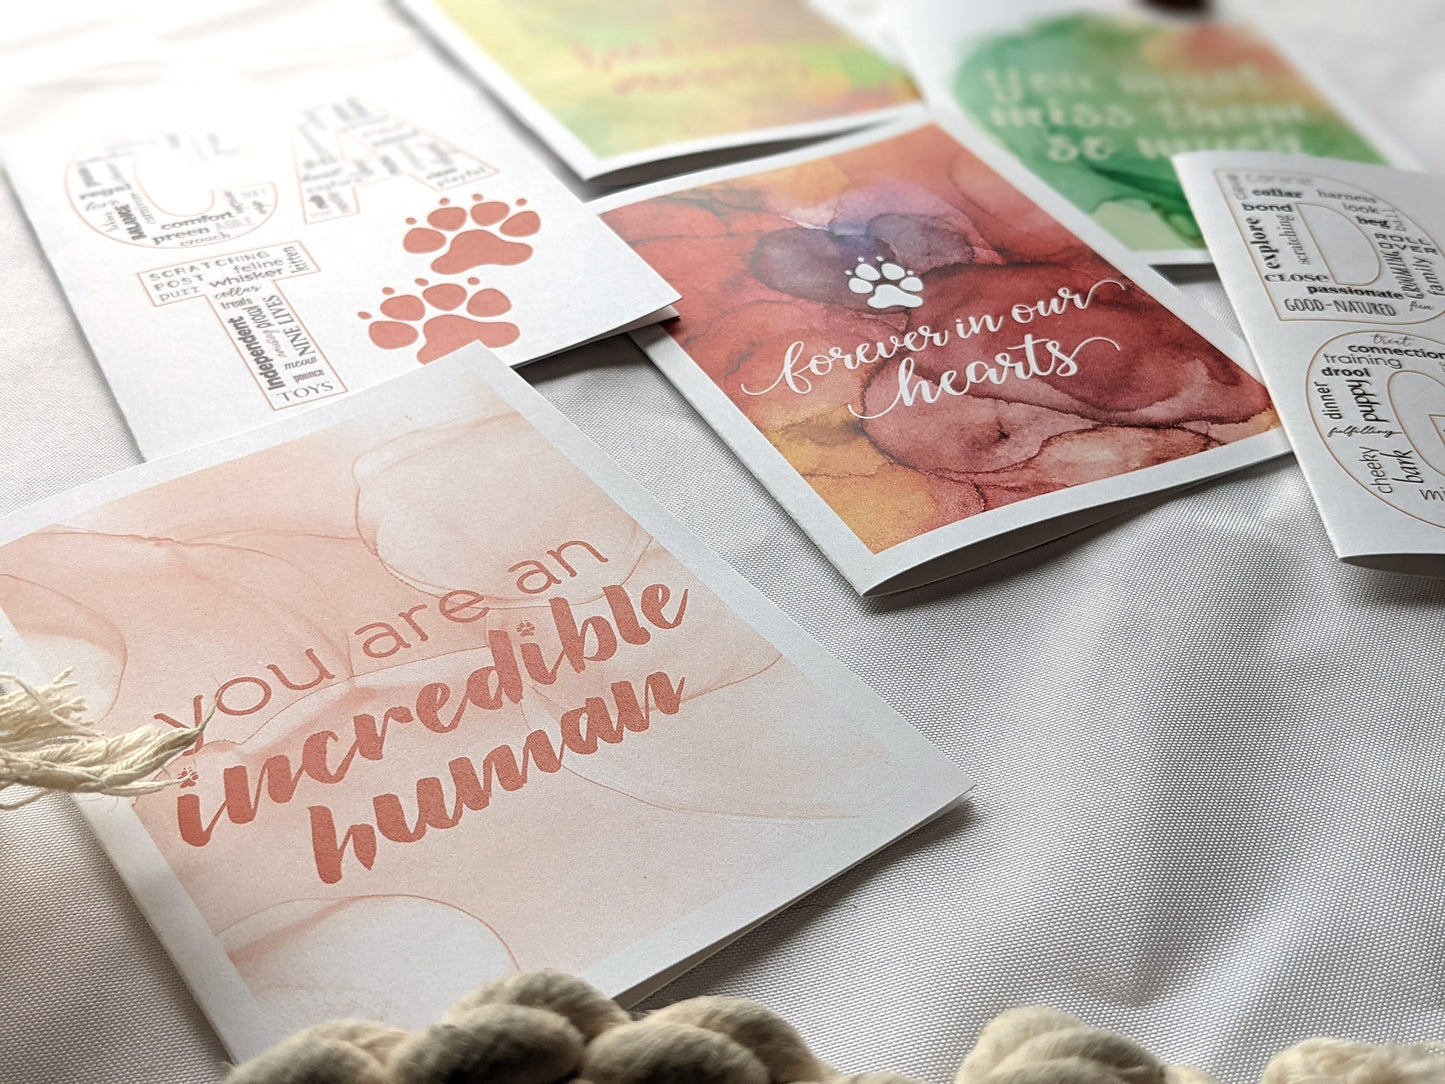 mothers day card from dog | you are an incredible human | pet owner | dog mom | dog dad